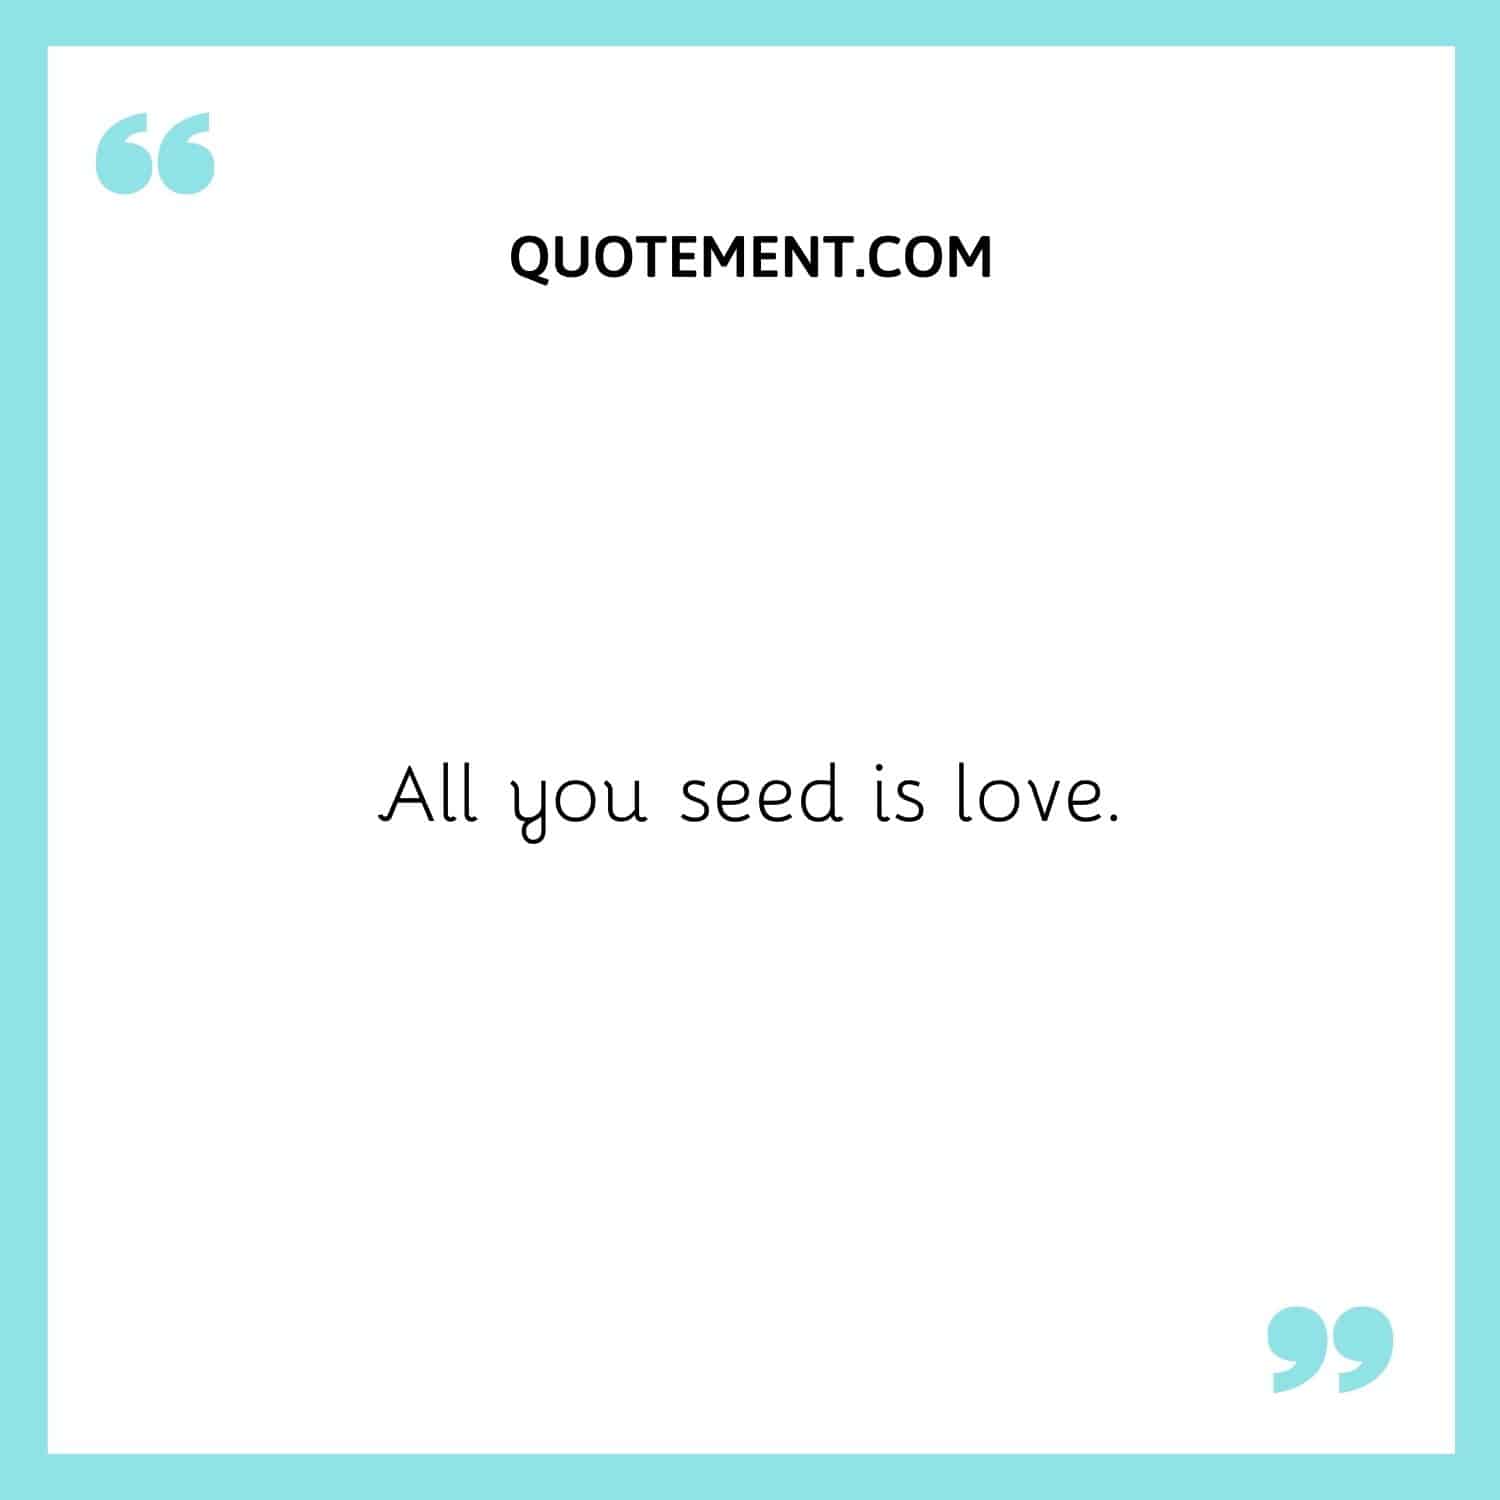 All you seed is love